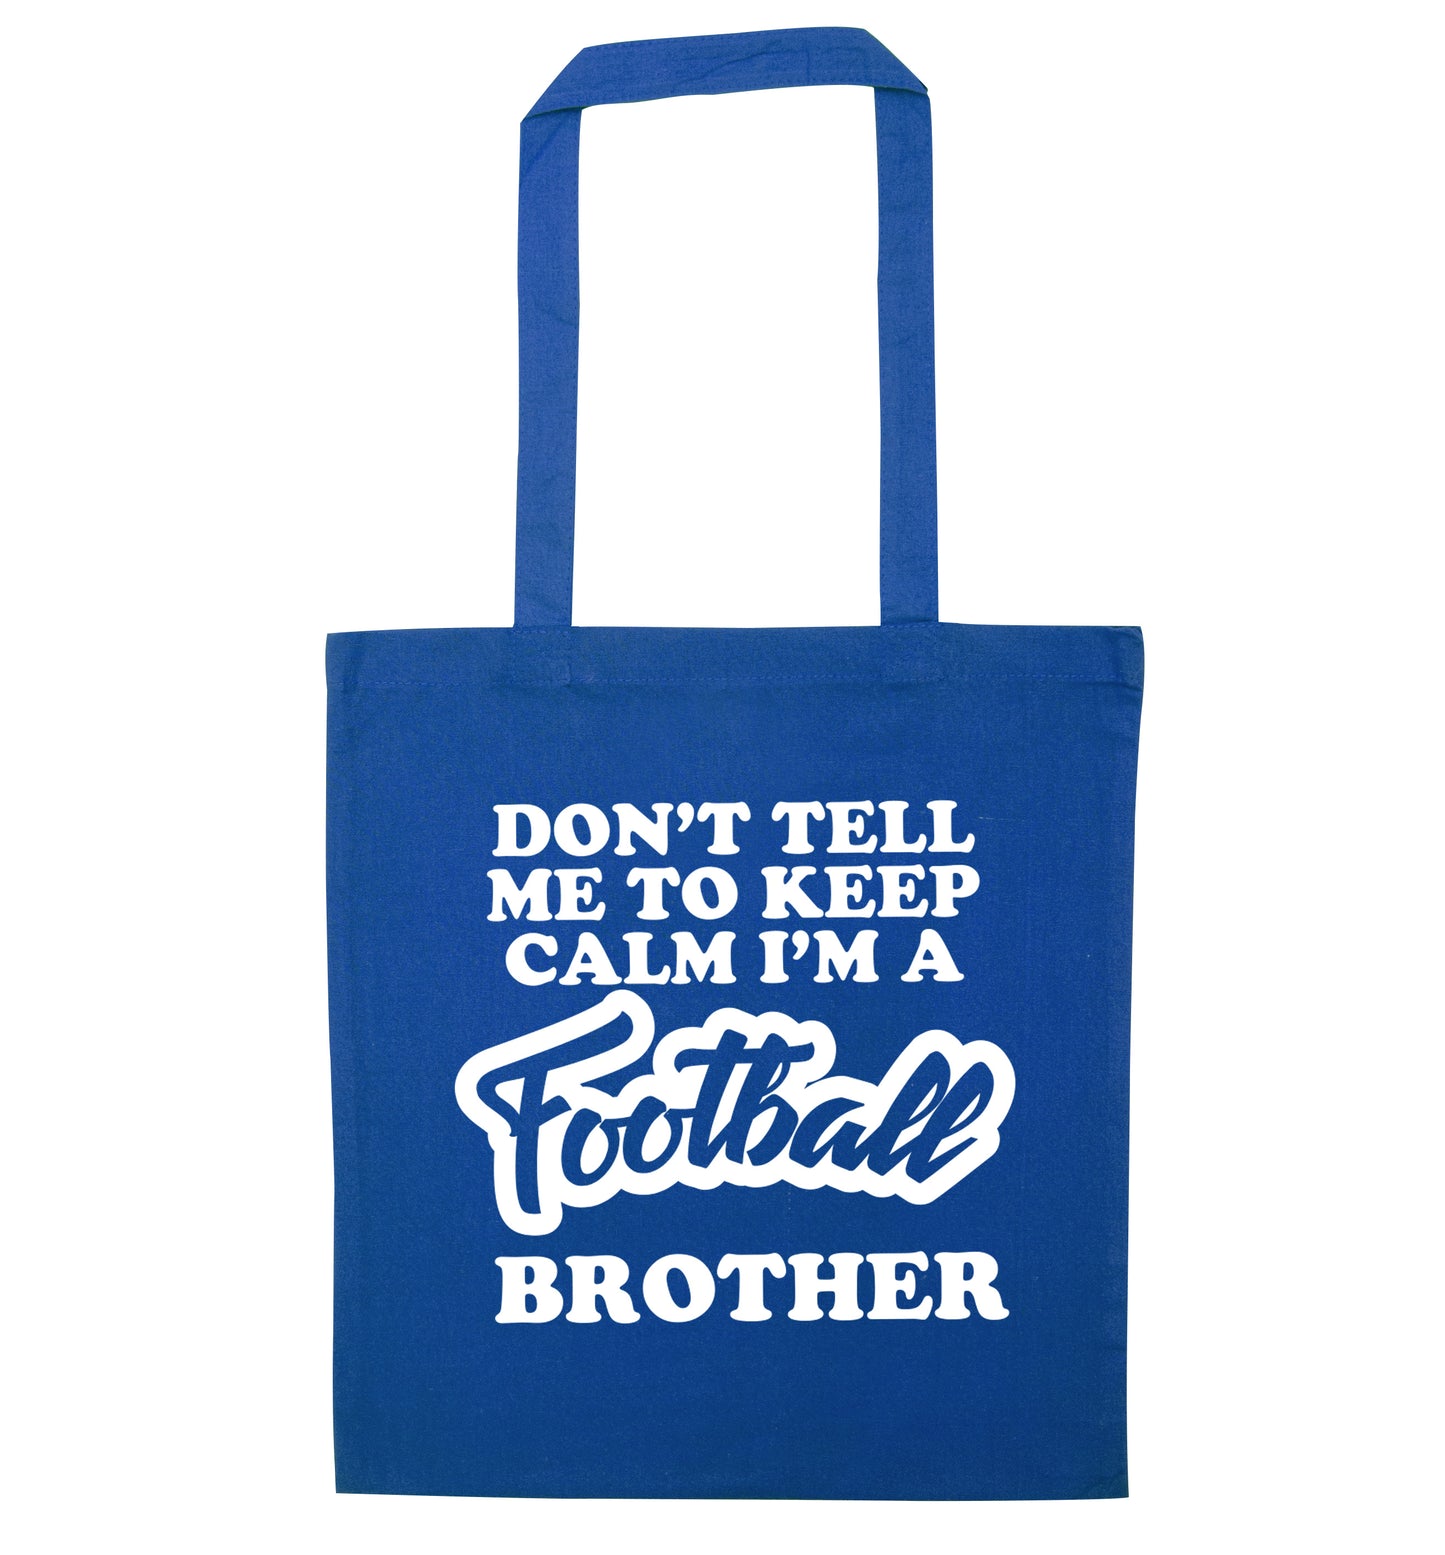 Don't tell me to keep calm I'm a football brother blue tote bag